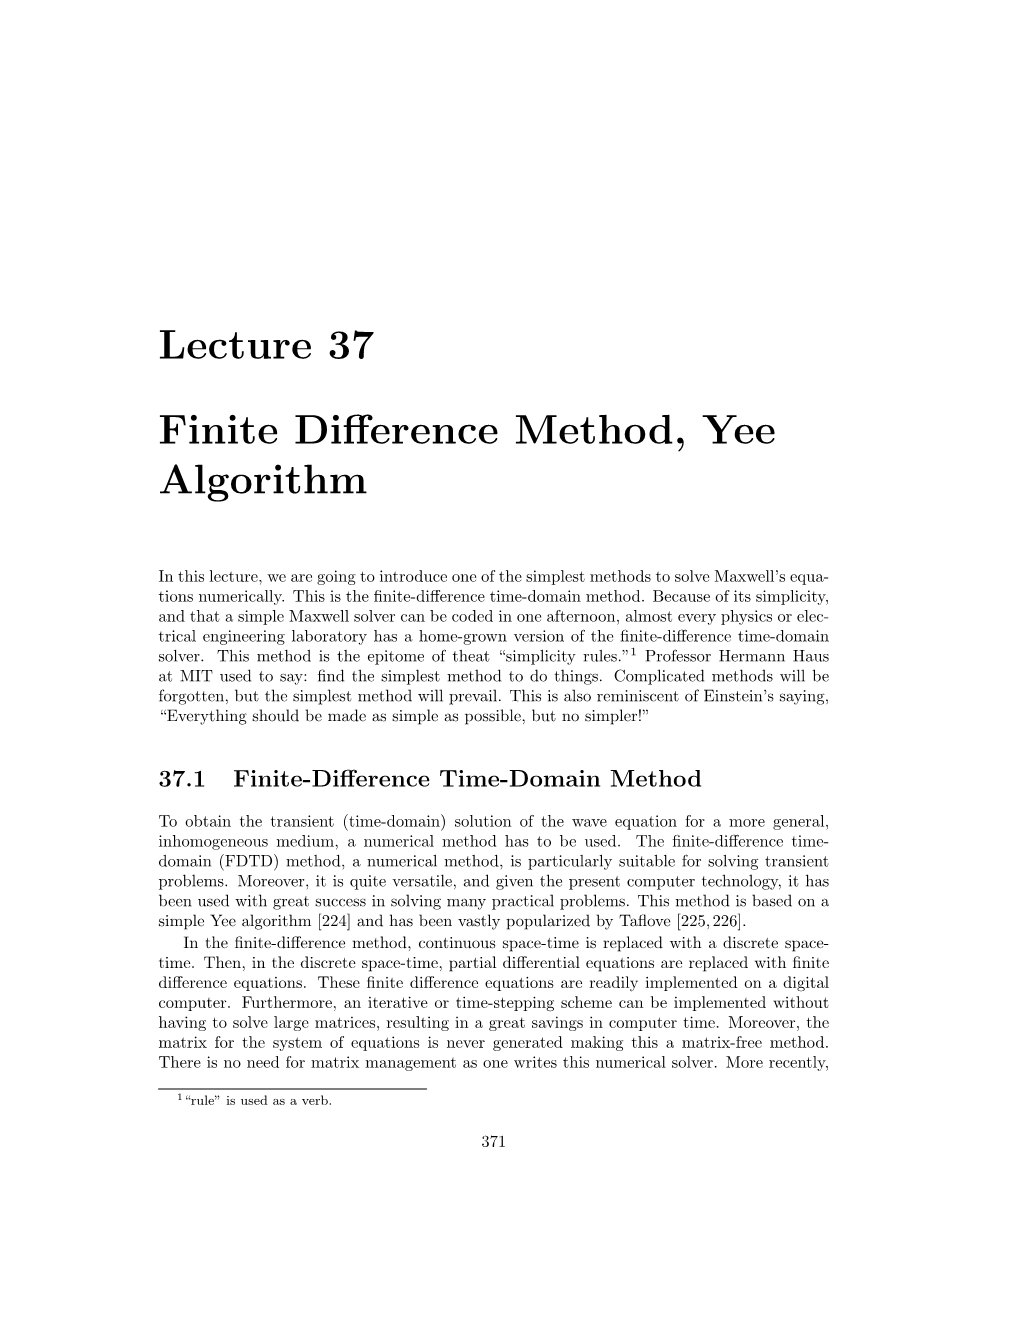 Lecture 37 Finite Difference Method, Yee Algorithm